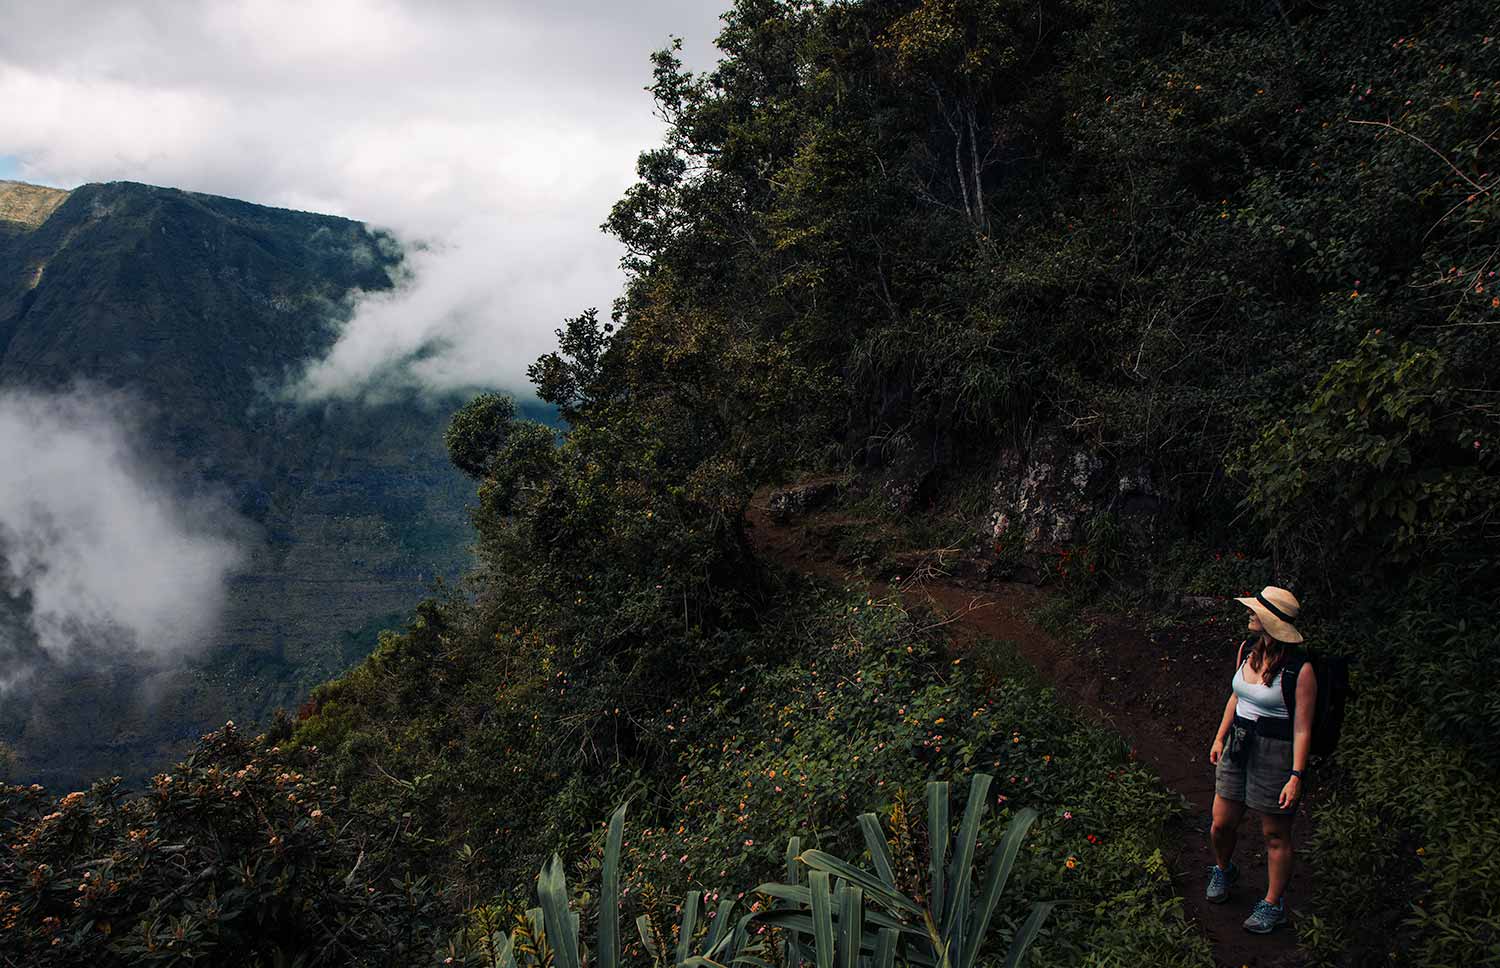 Serene moments amidst nature's beauty during the Reunion Island hiking experience